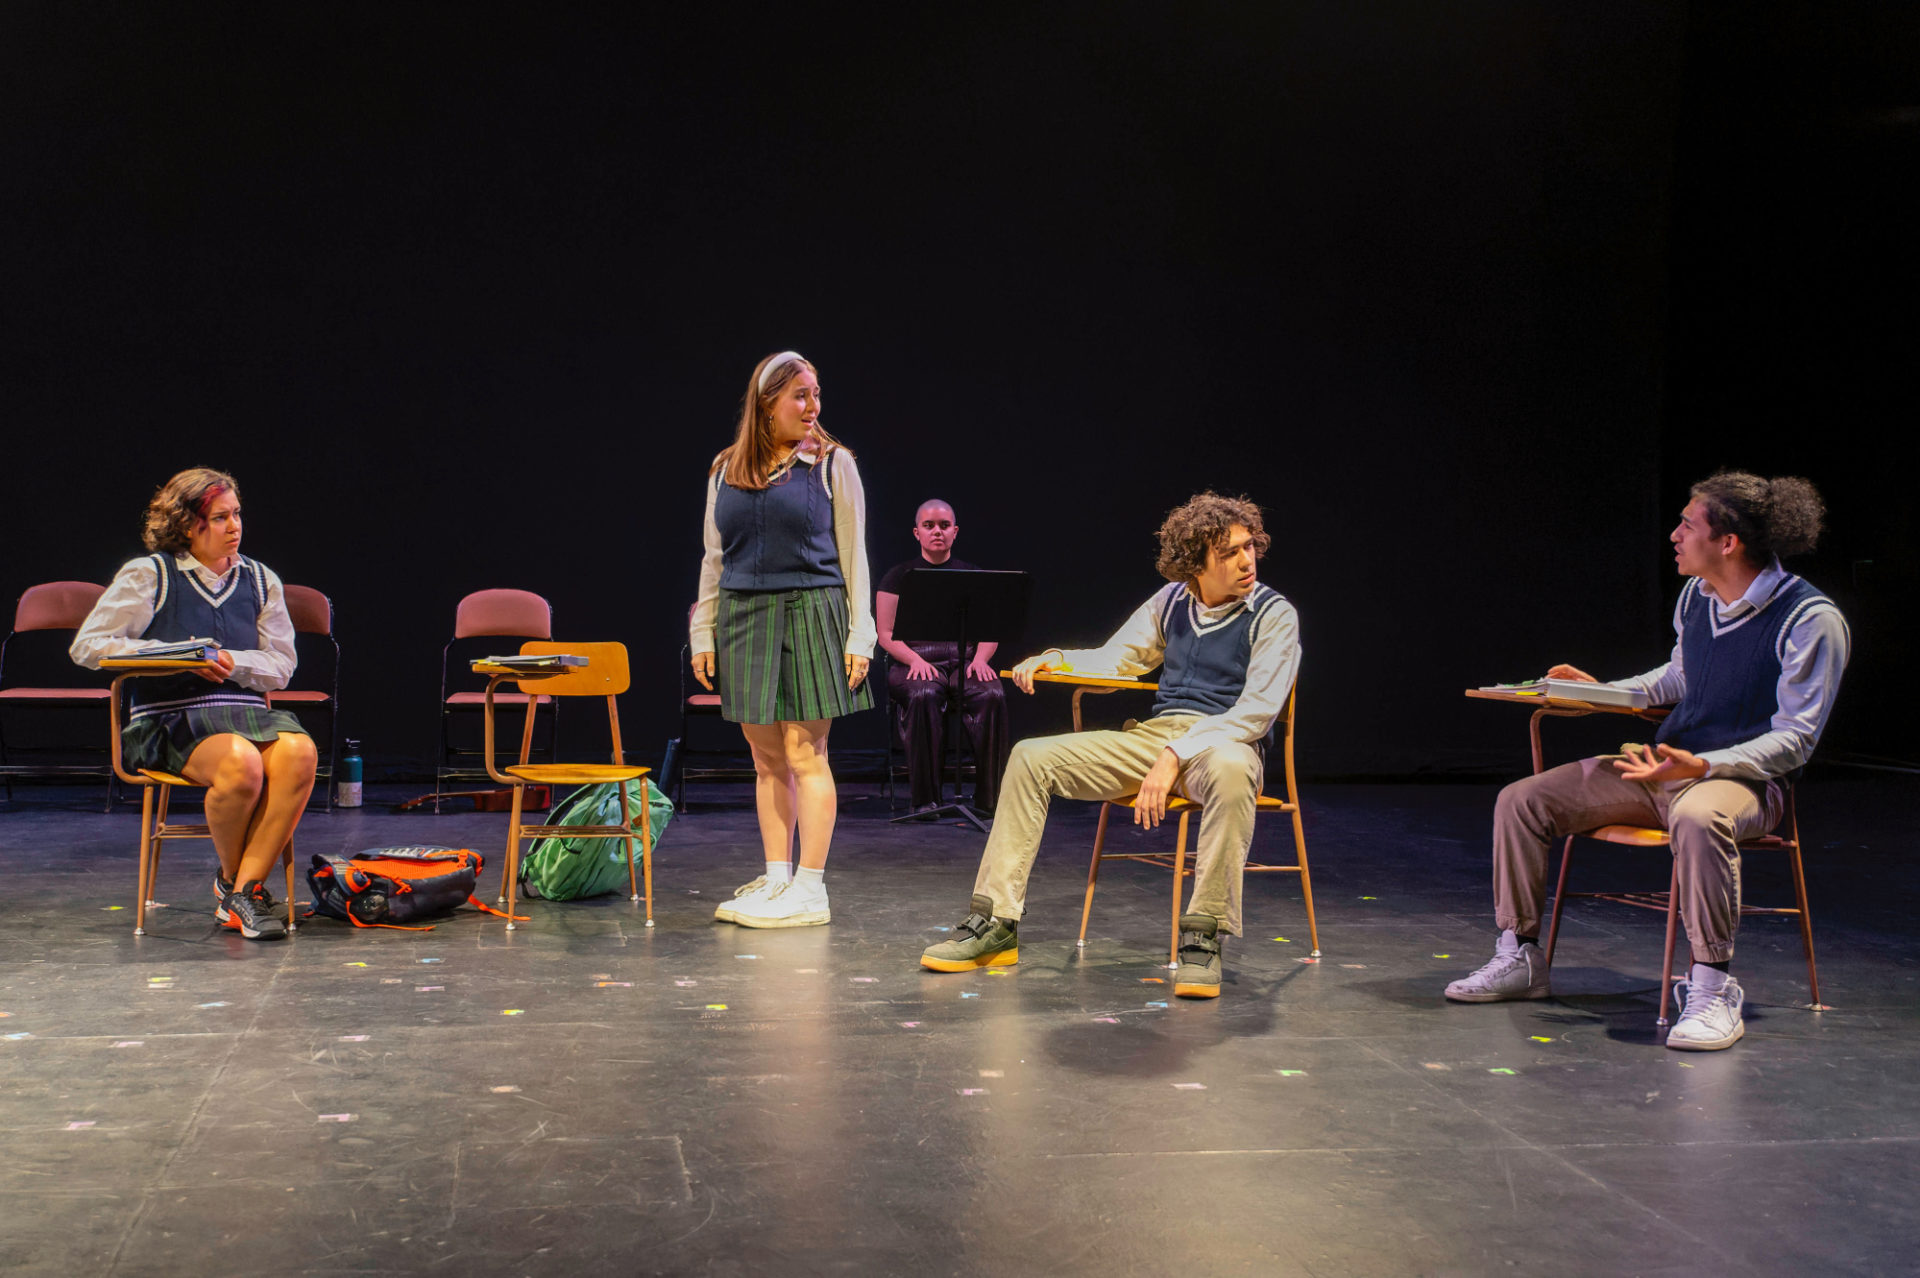 Four young people are on a theatre stage. They are all wearing school uniforms. Three are sitting down, one woman is standing up. There is a person in black sitting behind them and watching.